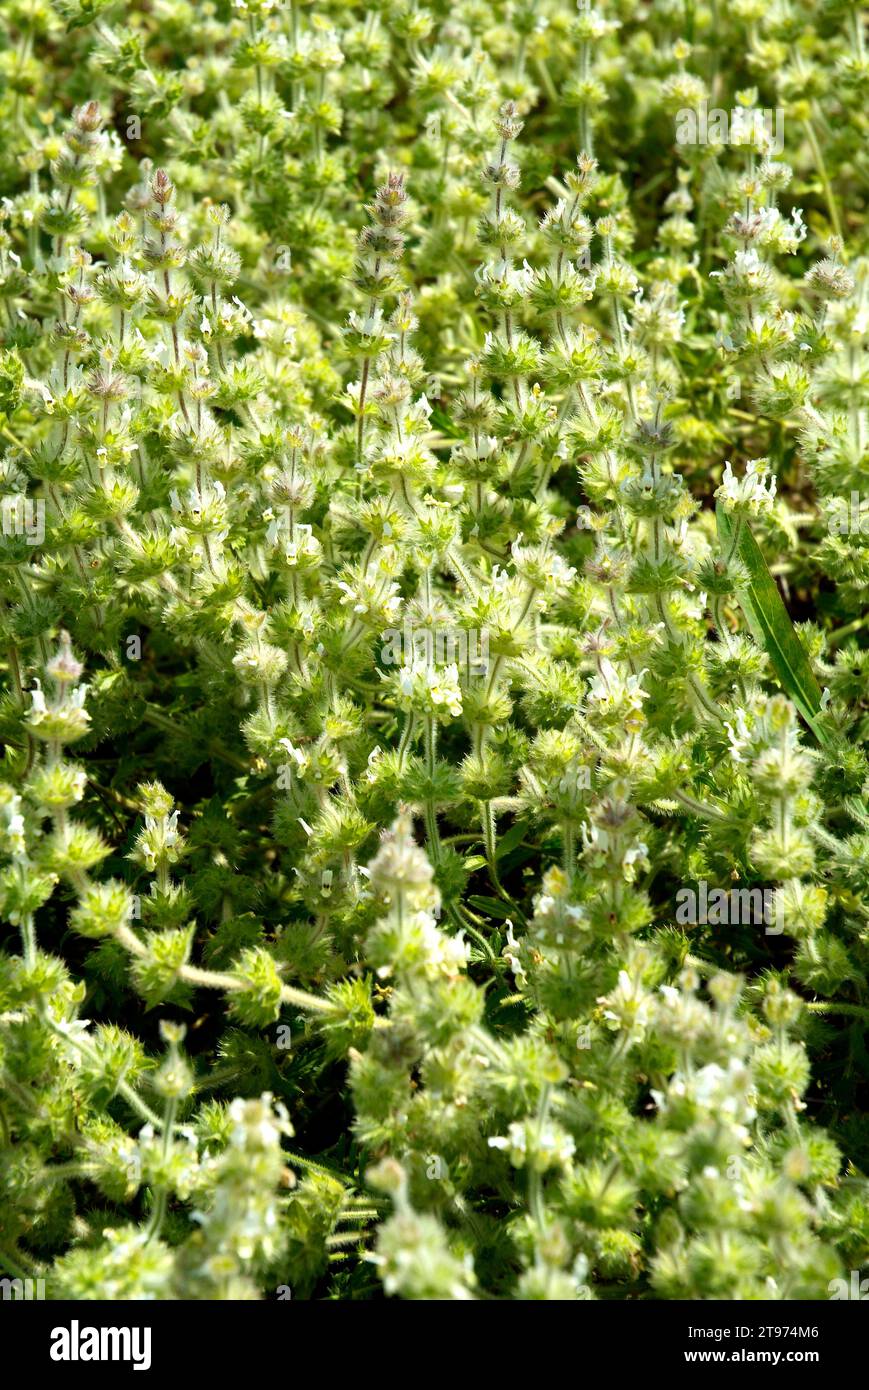 Rabo de gato (Sideritis hirsuta) is a perennial herb native to Iberian Peninsula, south France and north Africa. Stock Photo